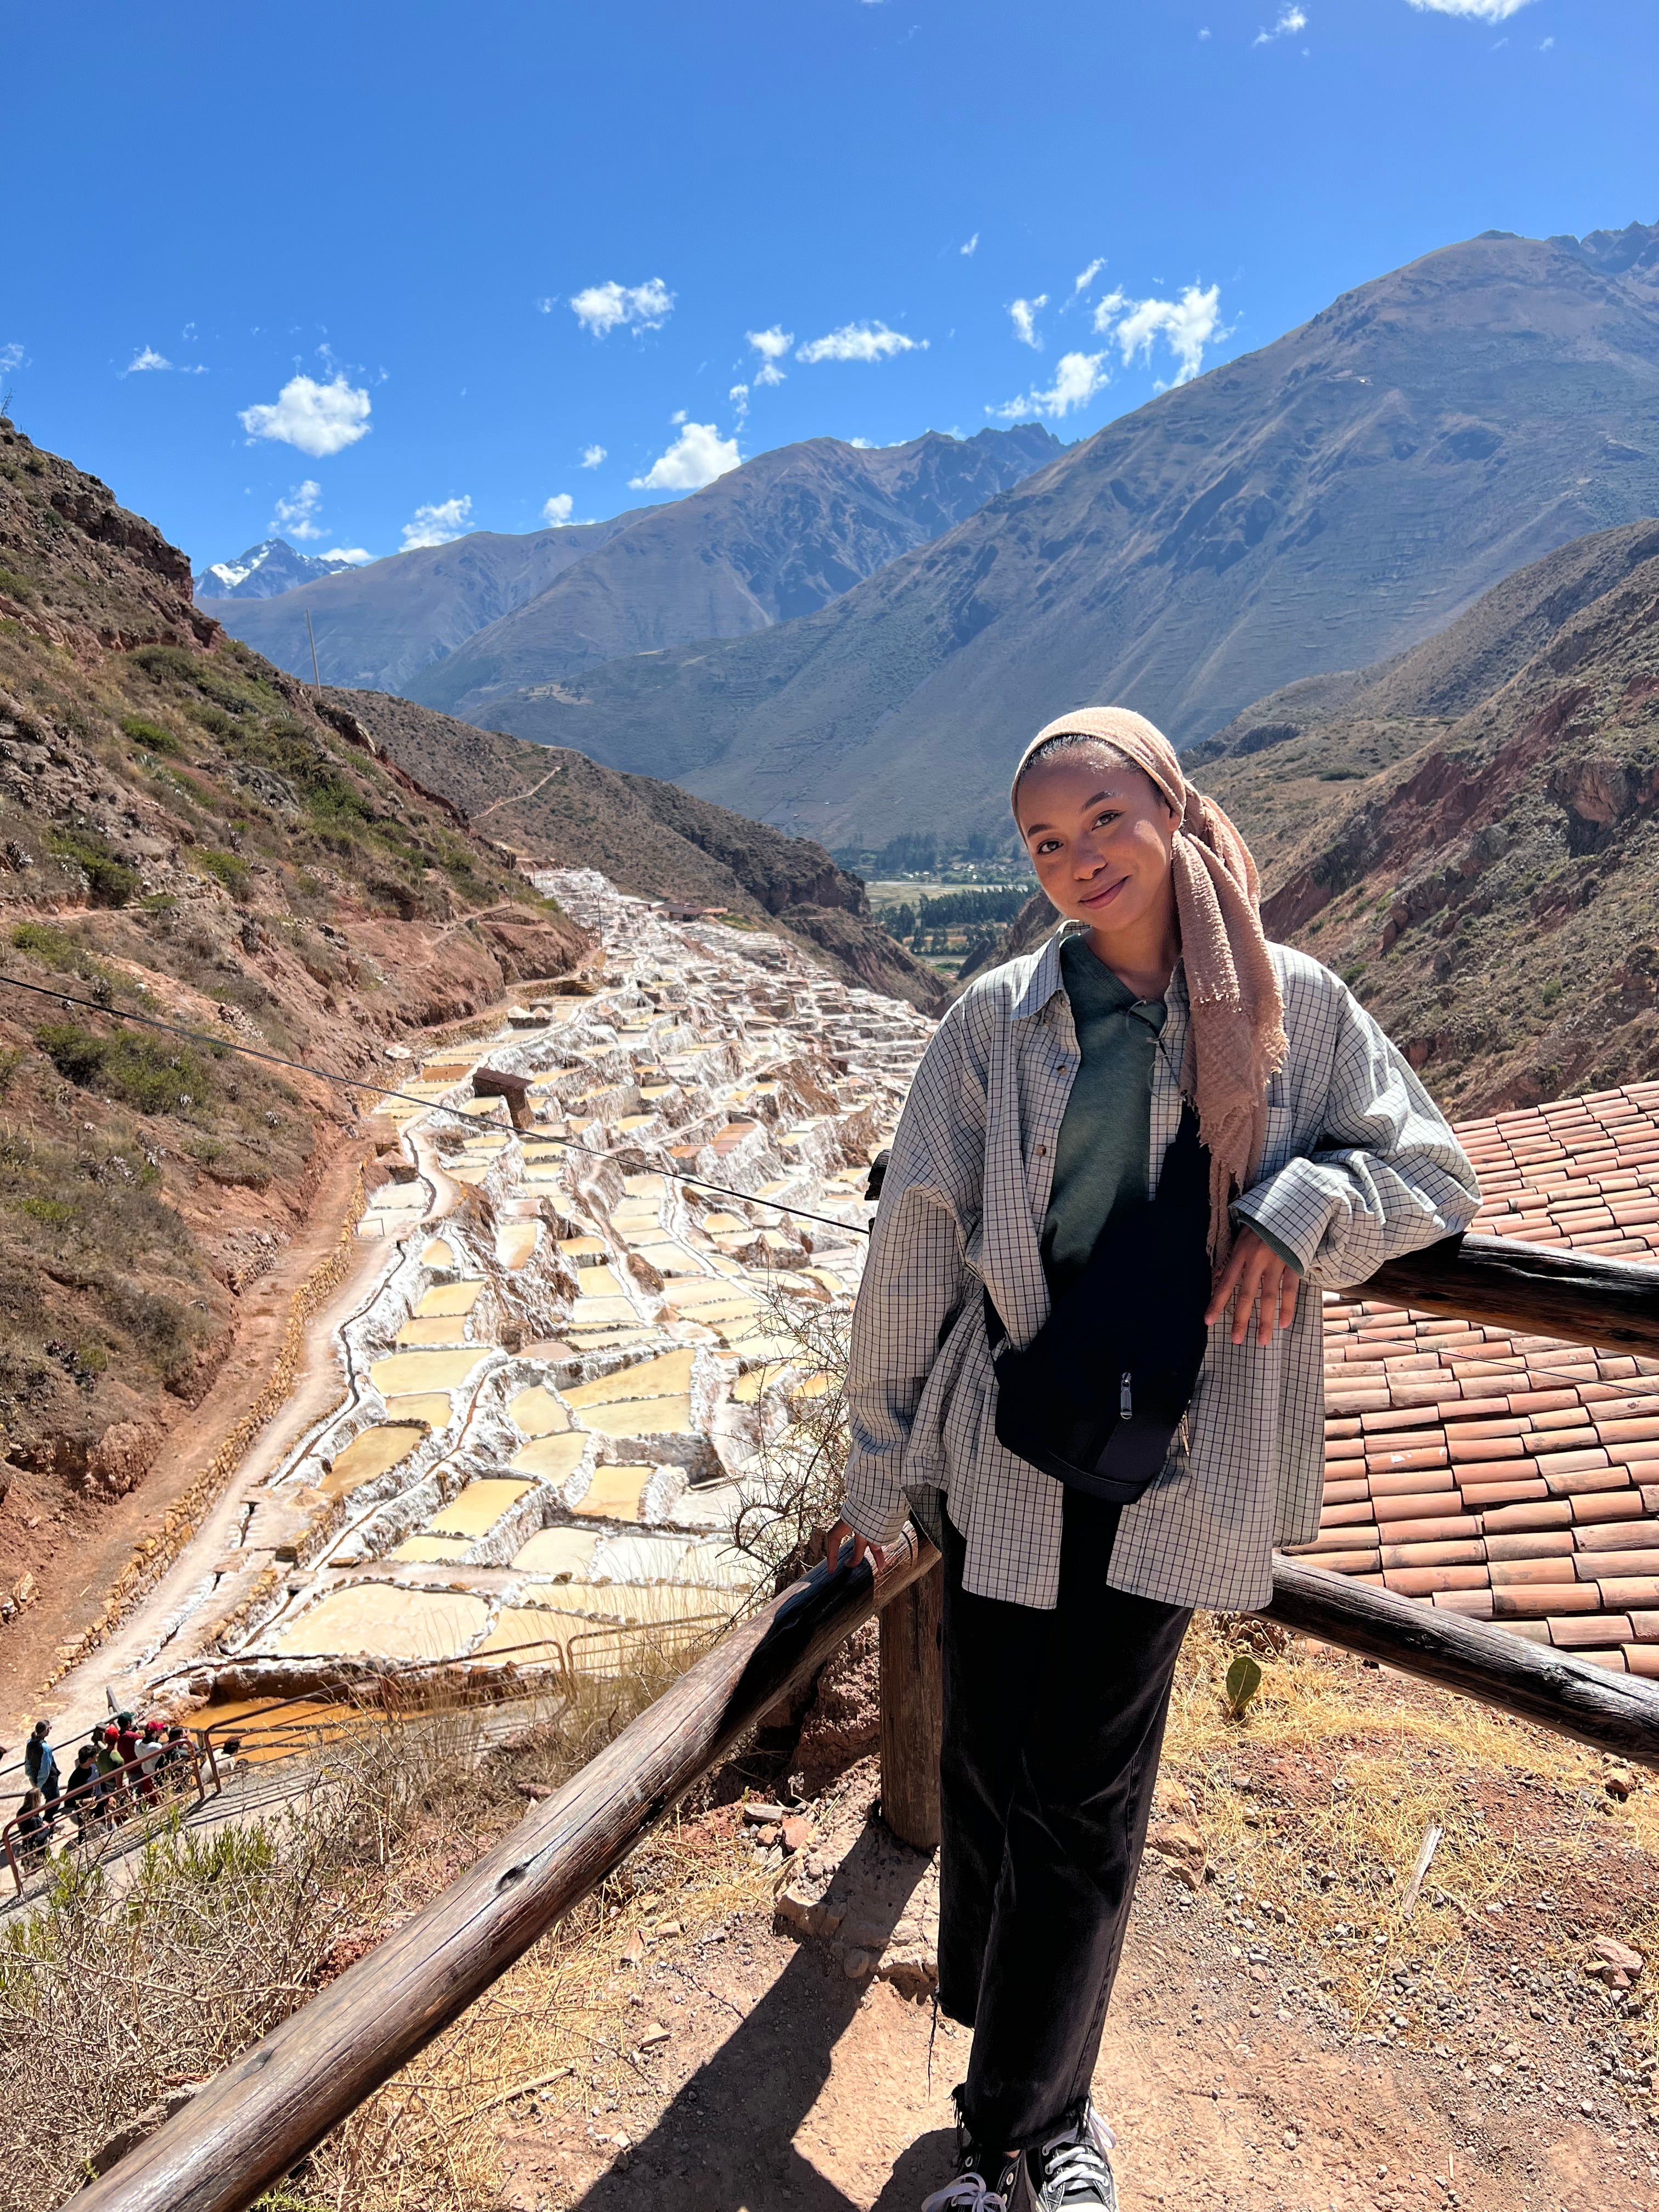 Aida Zaki leans against a railing with a view of salt mines in the background